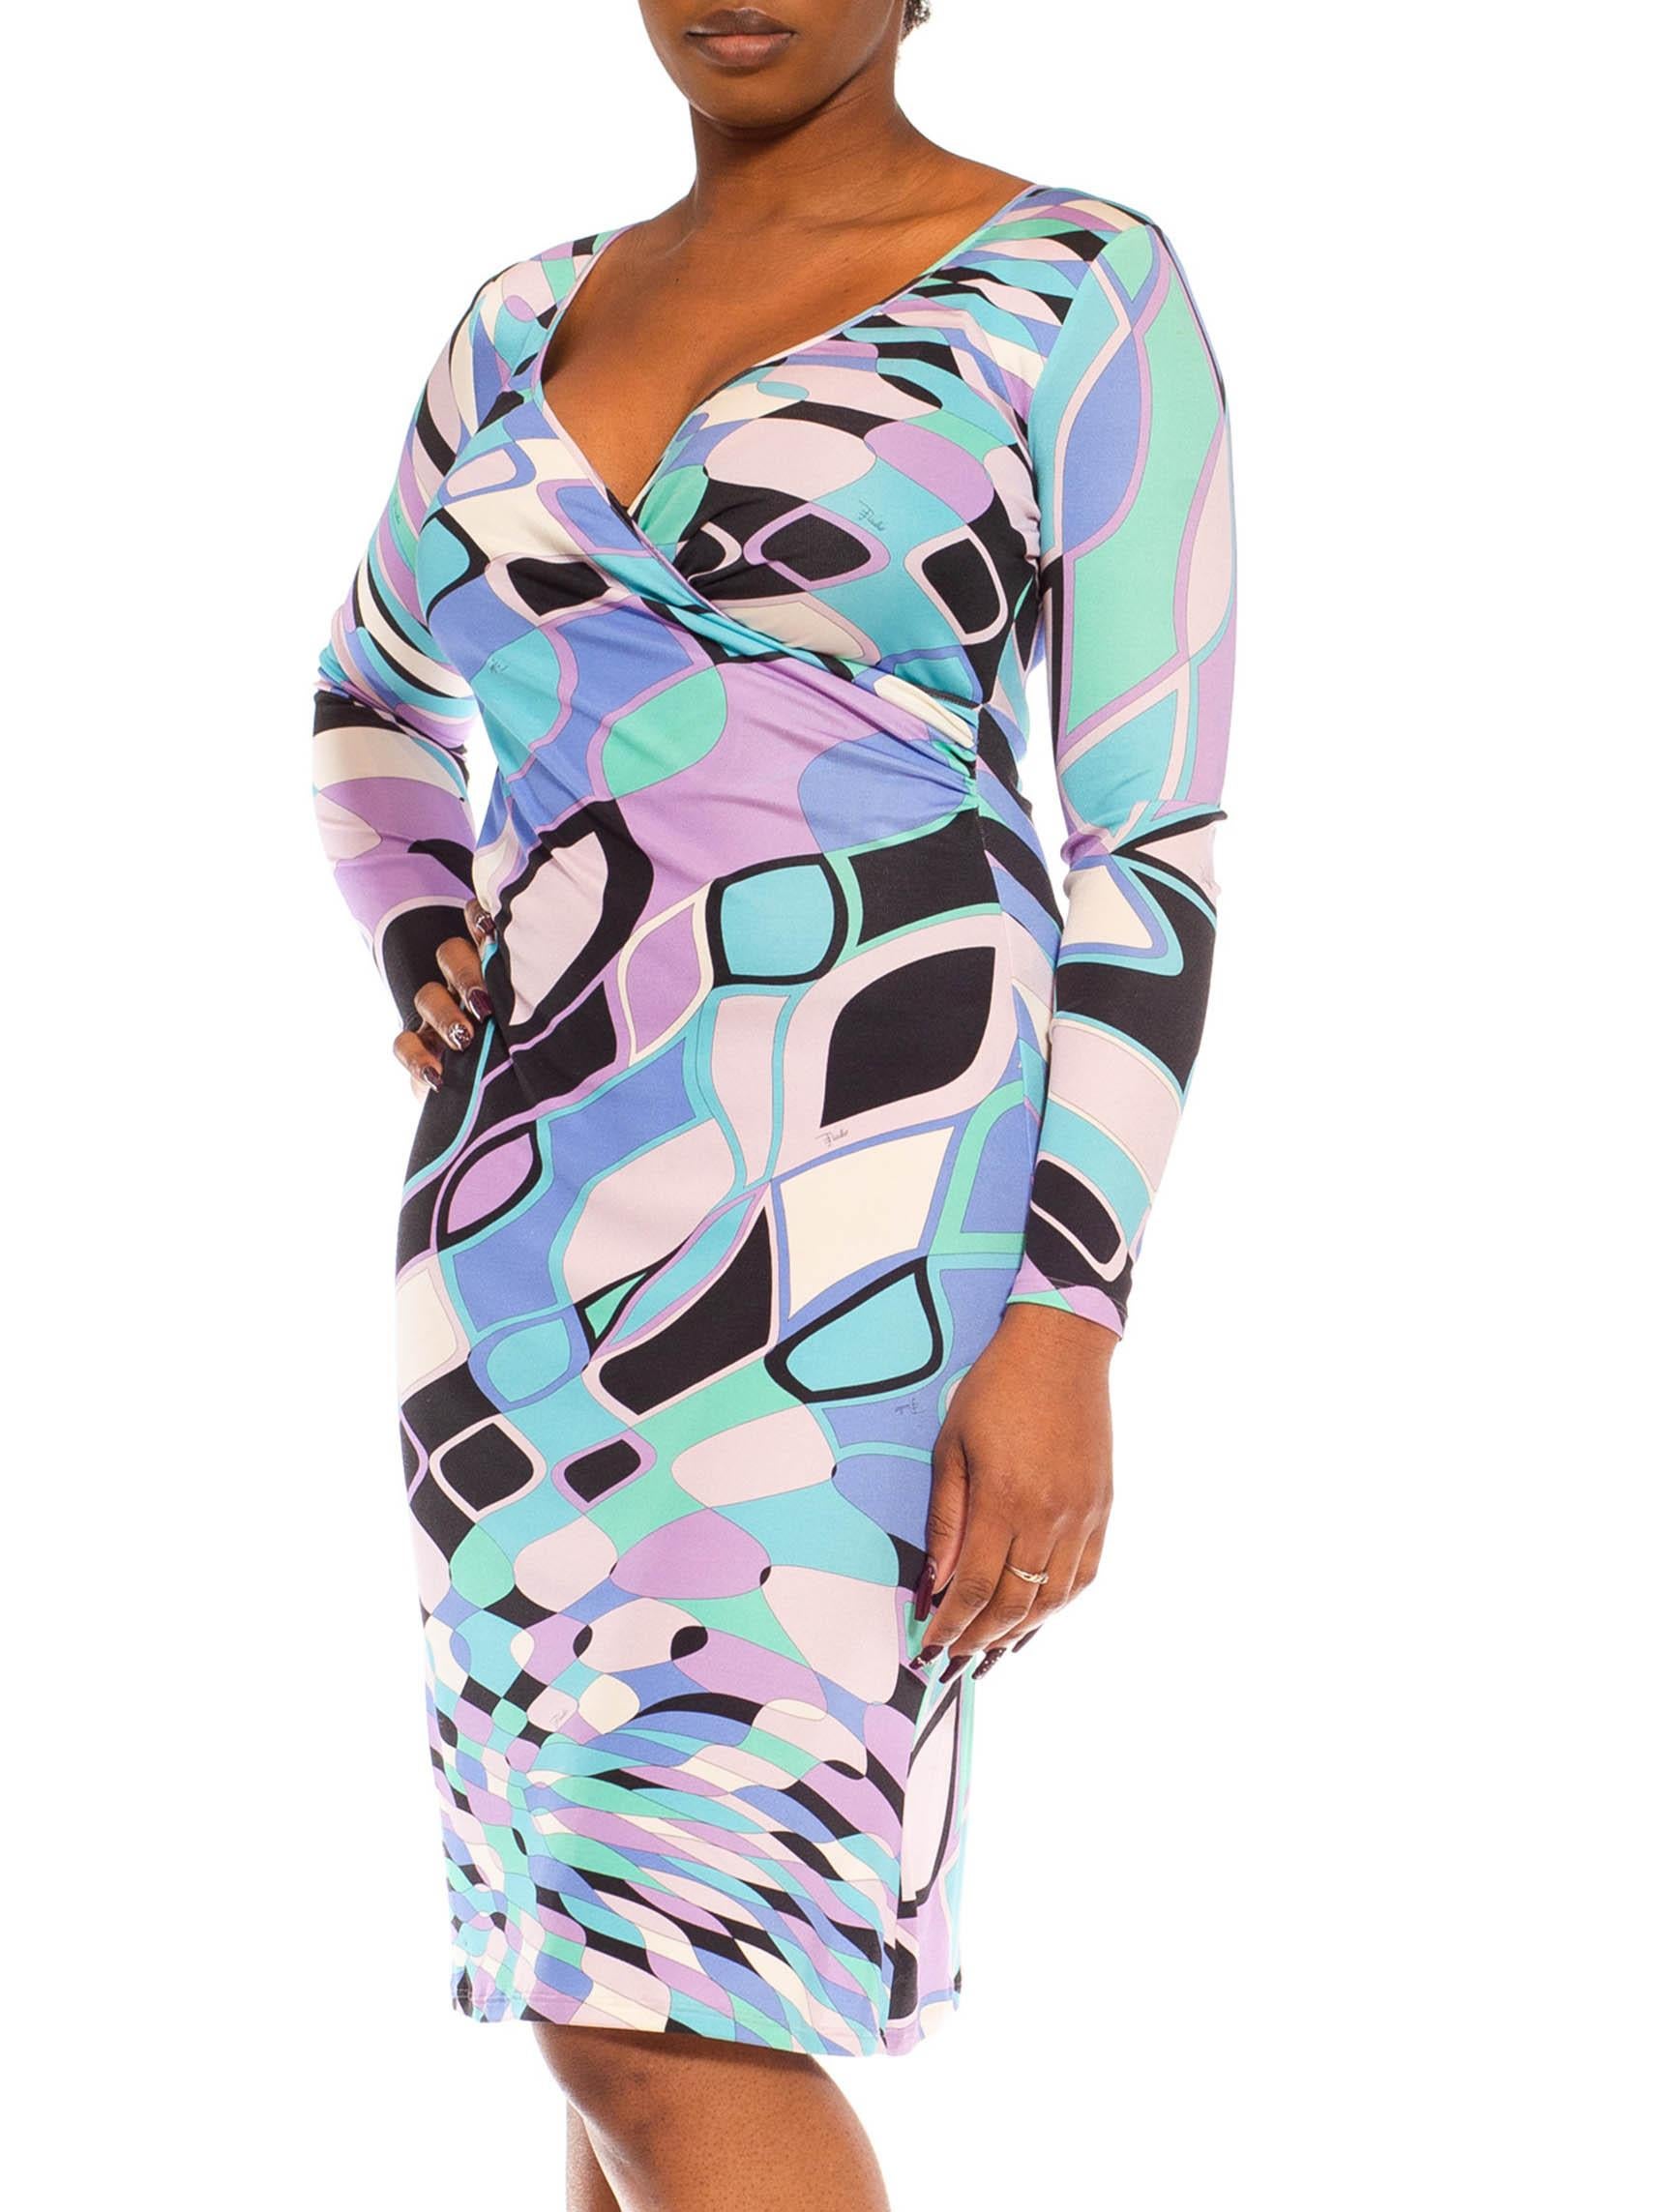 2000S Emilio Pucci Blue & Pink Psychedelic Silk Jersey Long Sleeved Dress For Sale 2